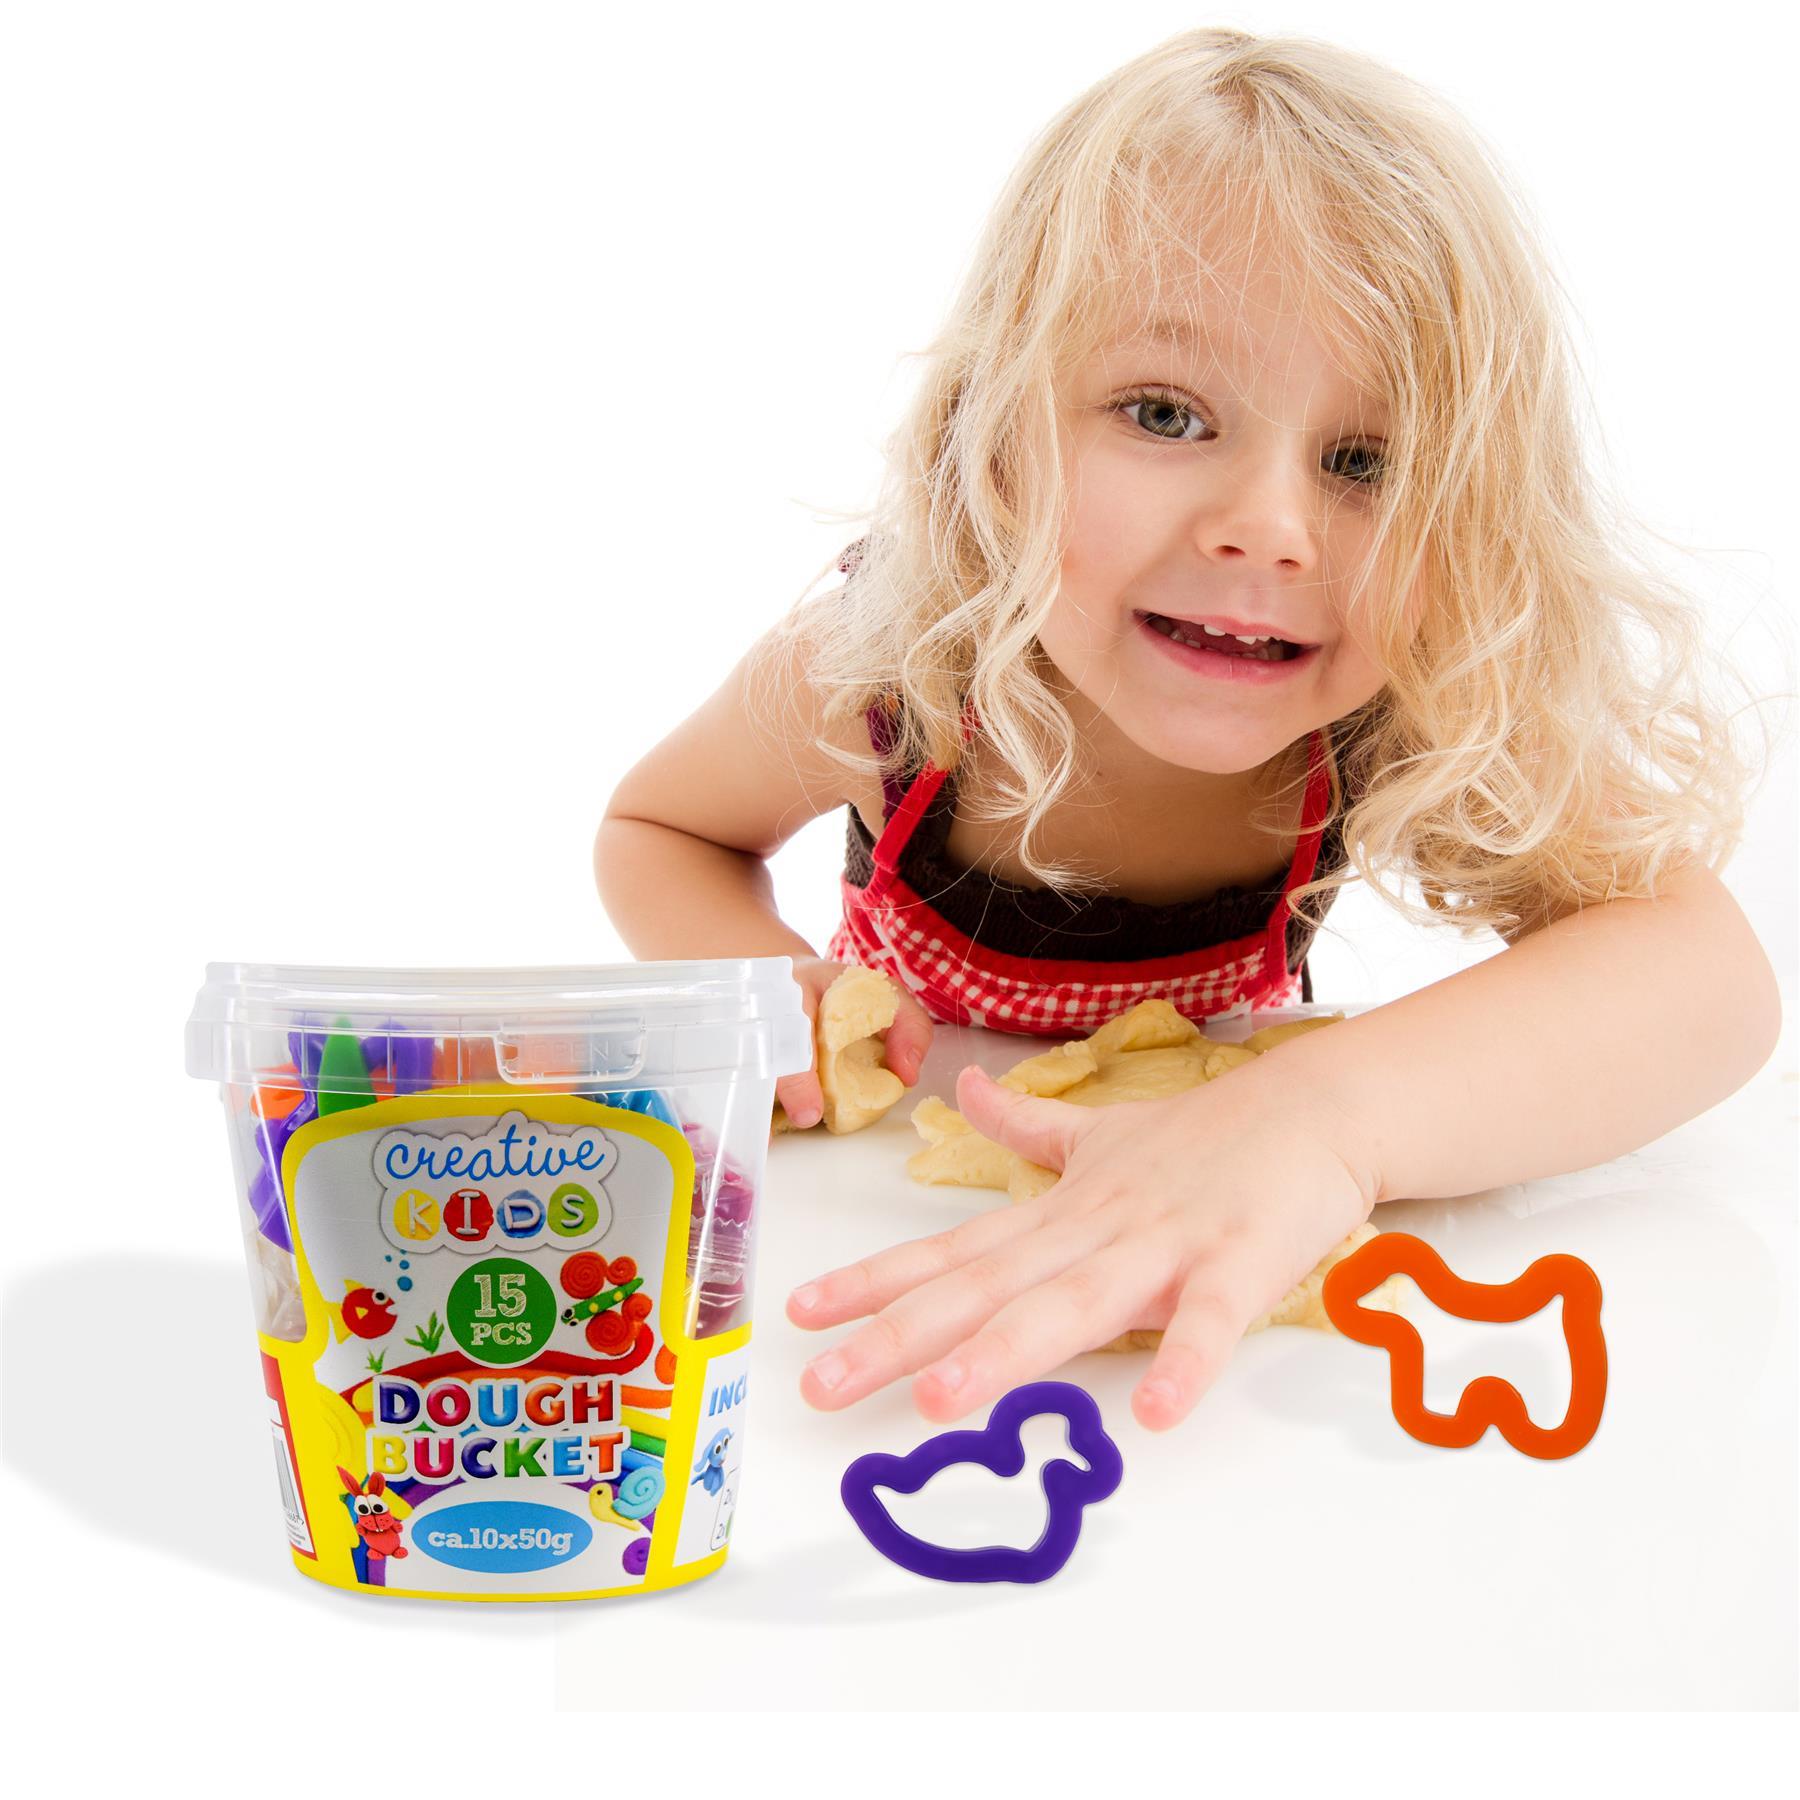 The Magic Toy Shop Toys and Games 15 pcs Modelling Dough Bucket